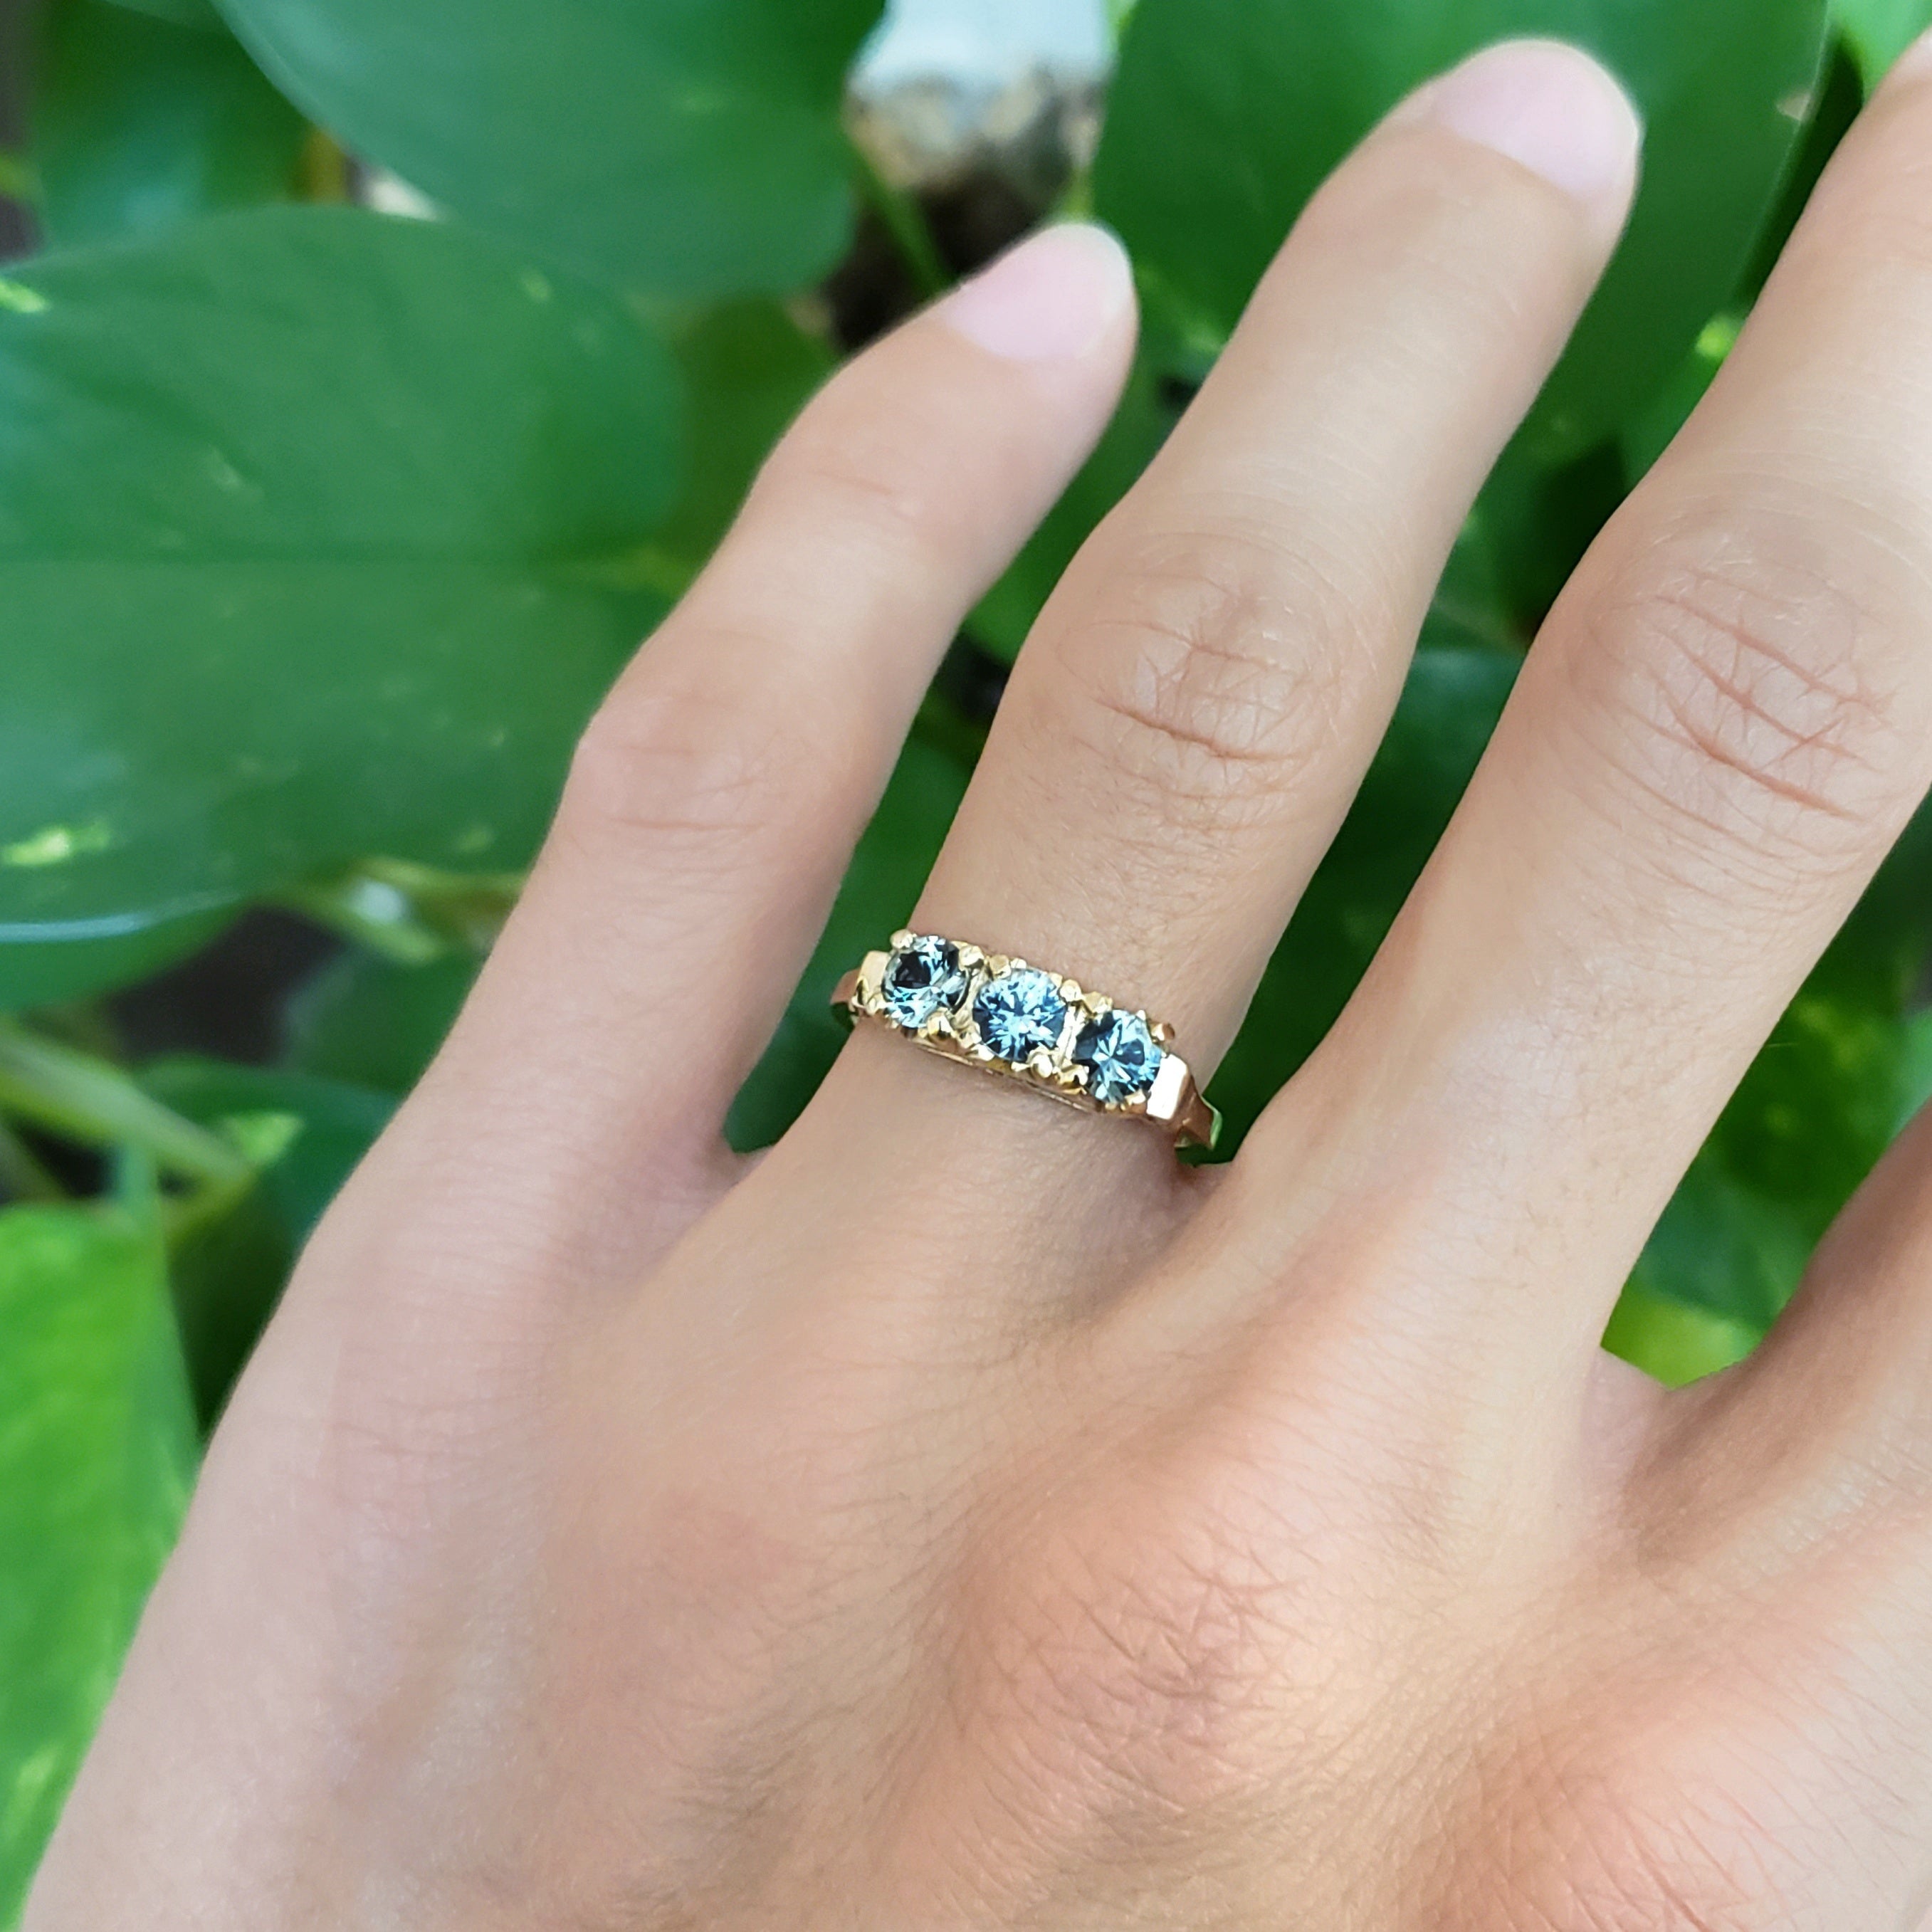 Custom Montana Sapphire Ring in Gold - Gardens of the Sun | Ethical Jewelry